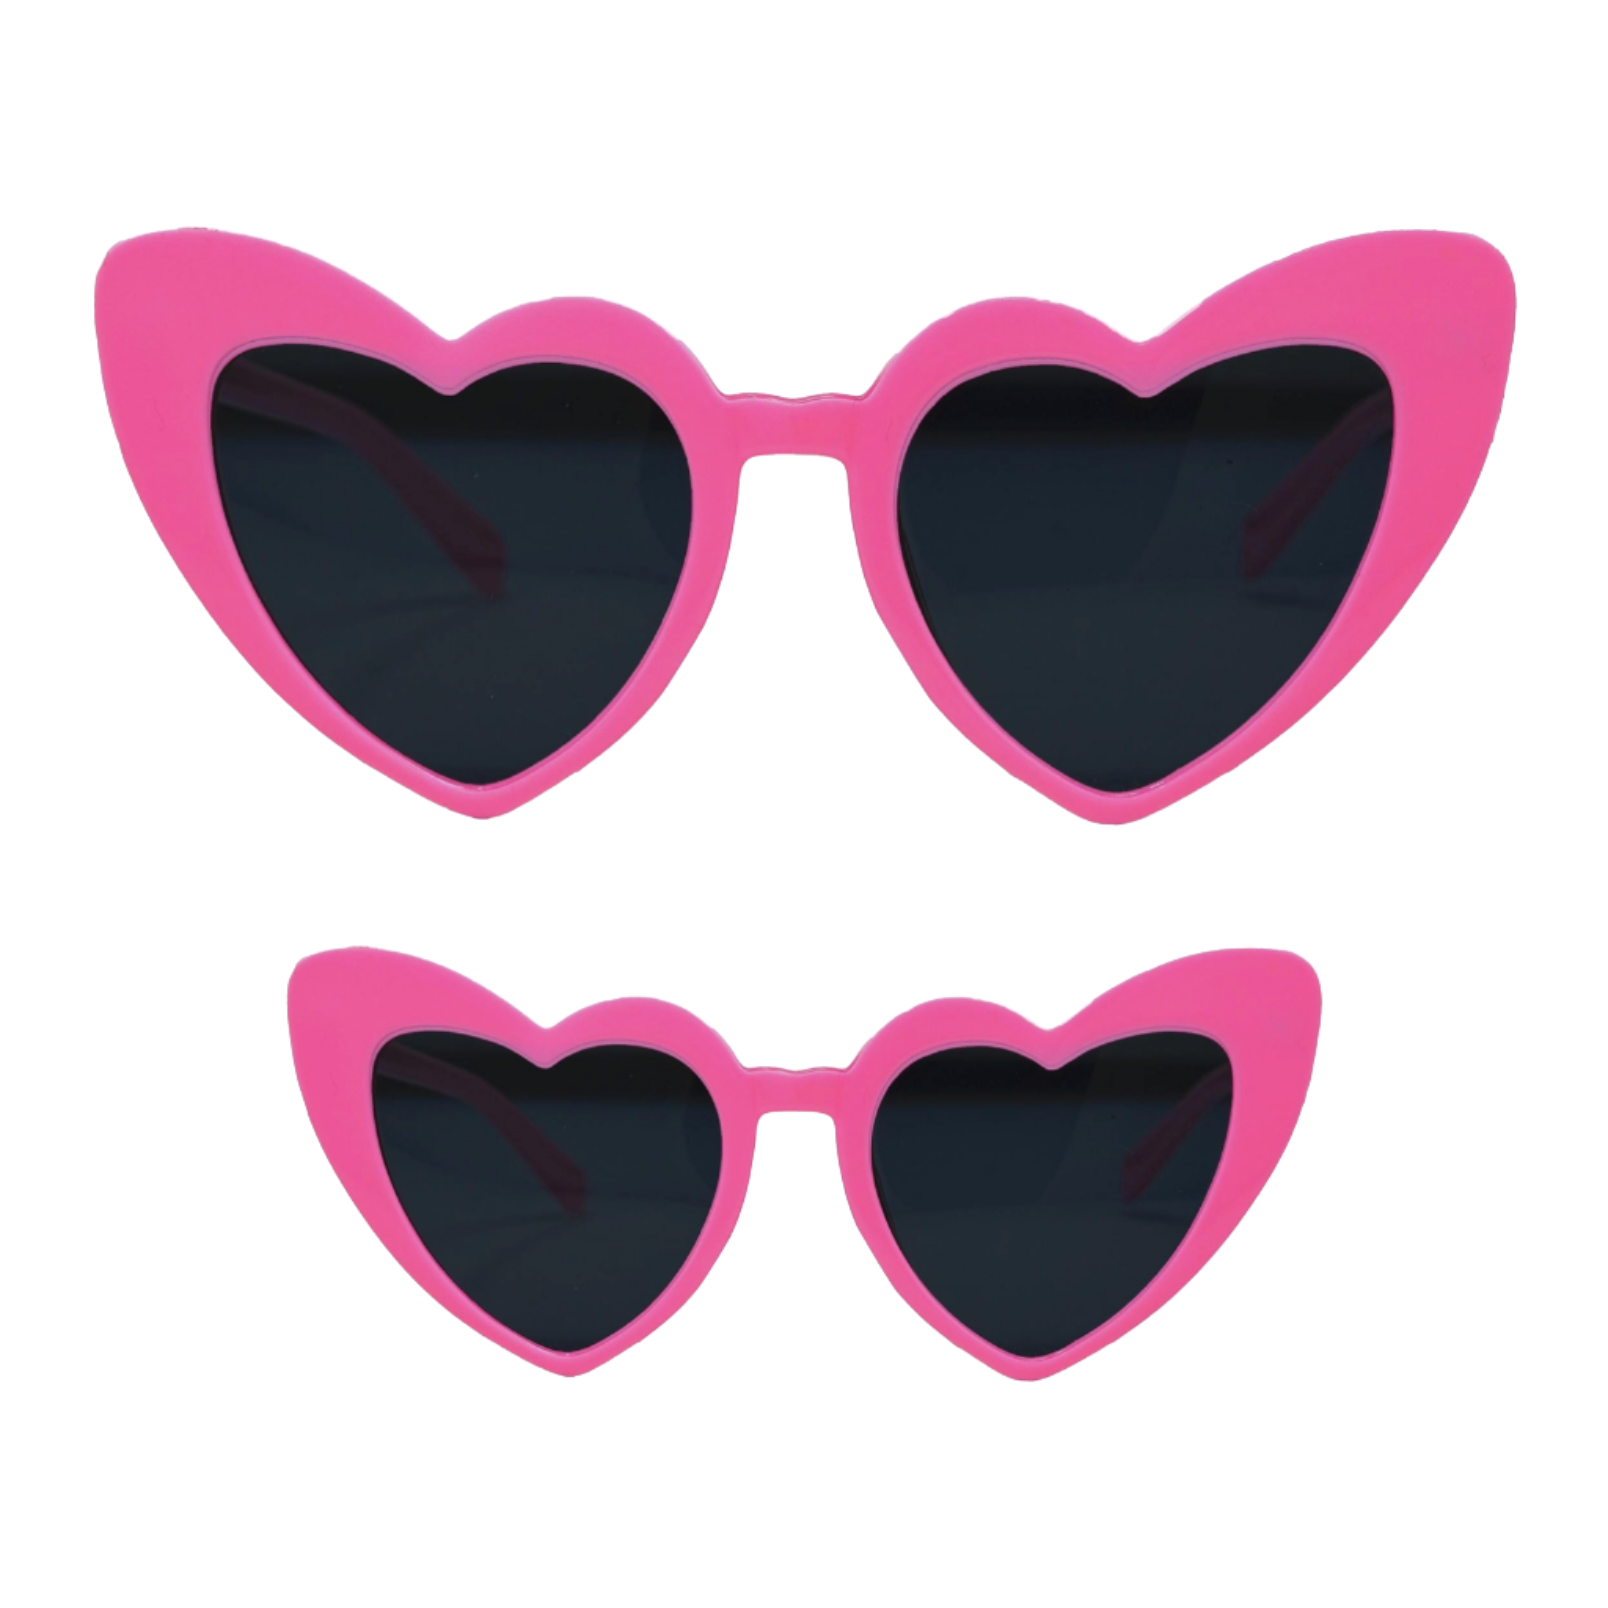 ADULT CANDY PINK HEART SHAPED SUNGLASSES